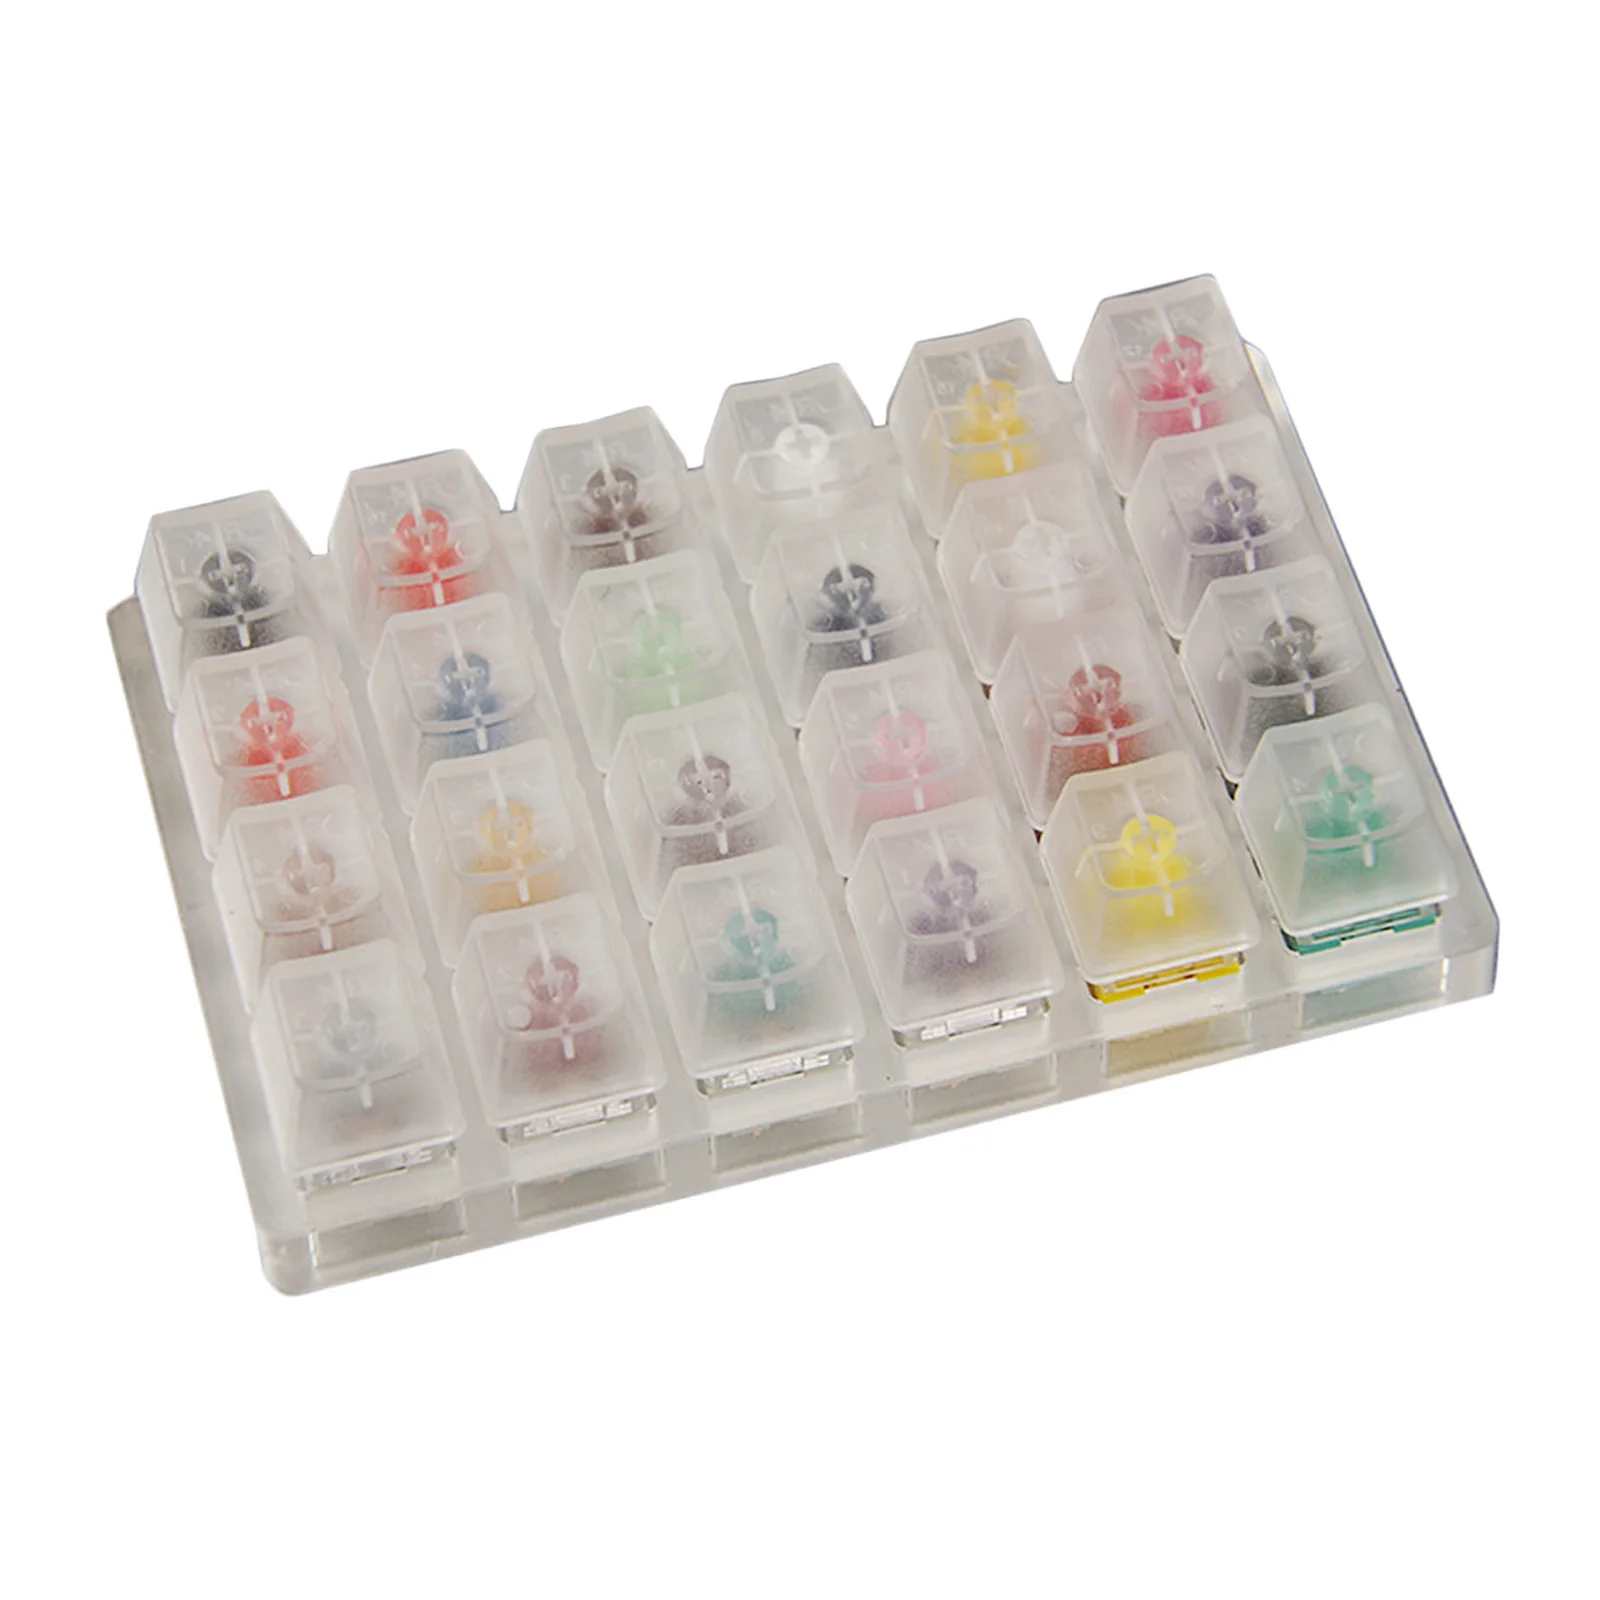 Acrylic 24-Key Clear Switches Tester for Mechanical Keyboard, with Acrylic Base Blank Keycaps